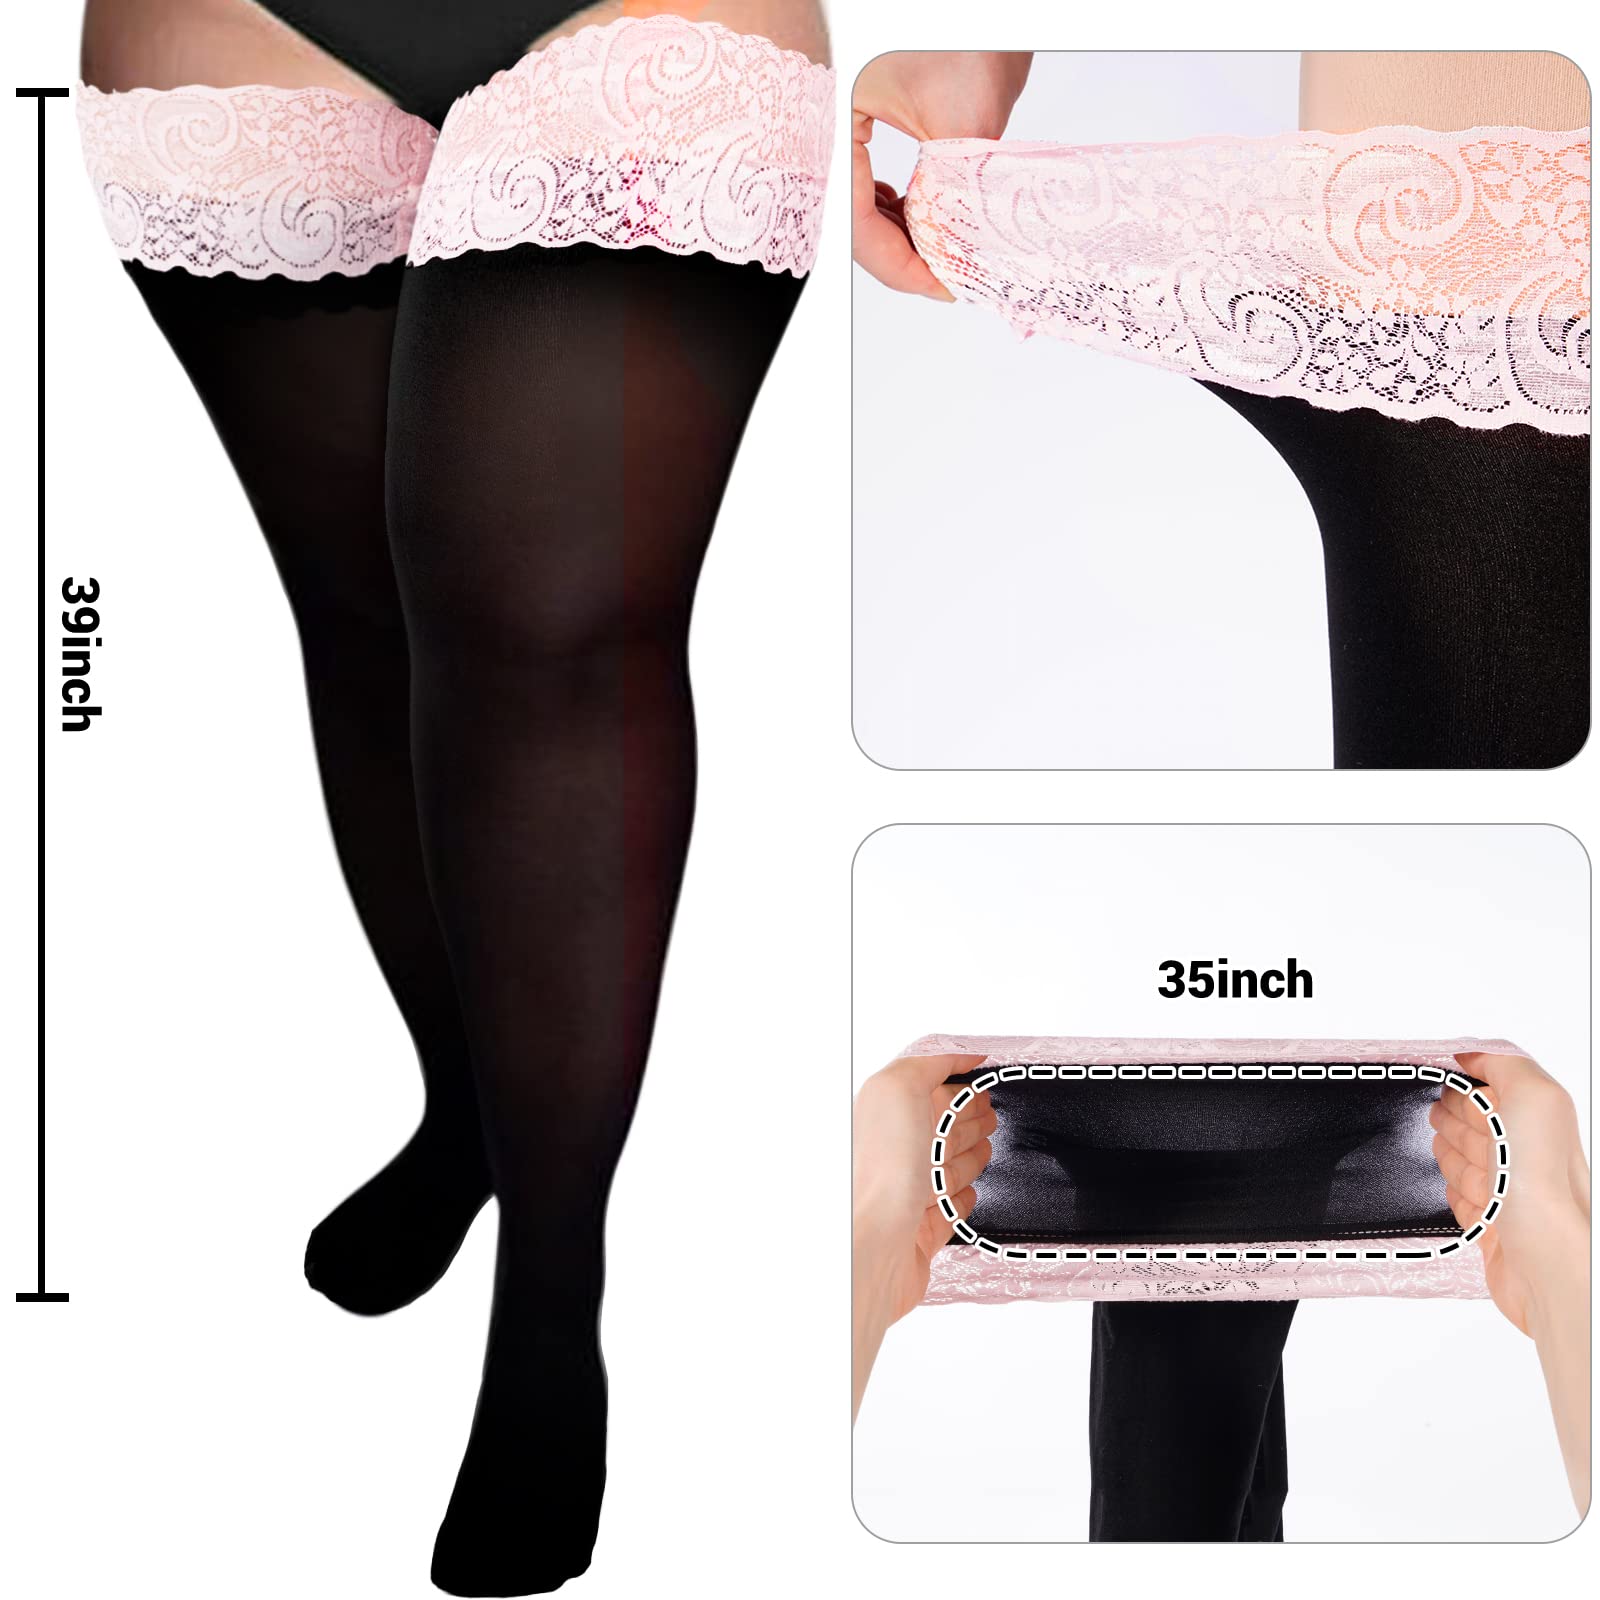 55D Semi Sheer Silicone Lace Stay Up Thigh Highs Pantyhose-Black & Light Lace - Moon Wood